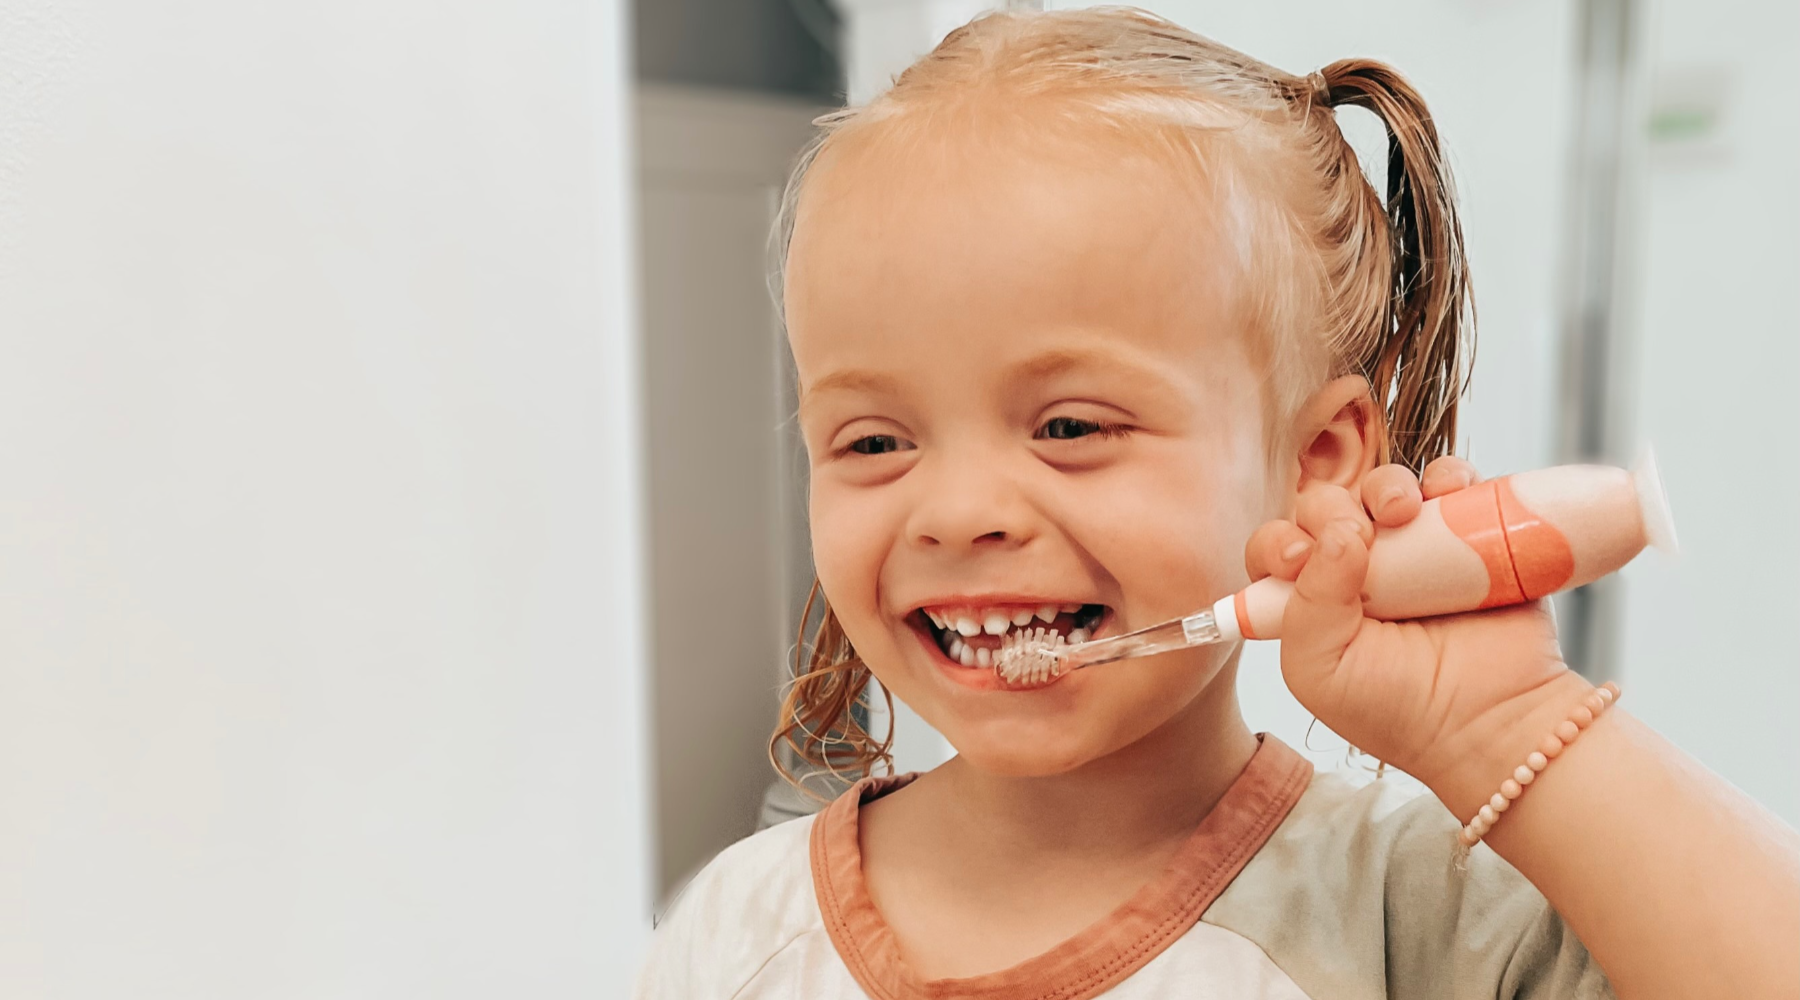 9 Tips to prevent tooth decay in kids